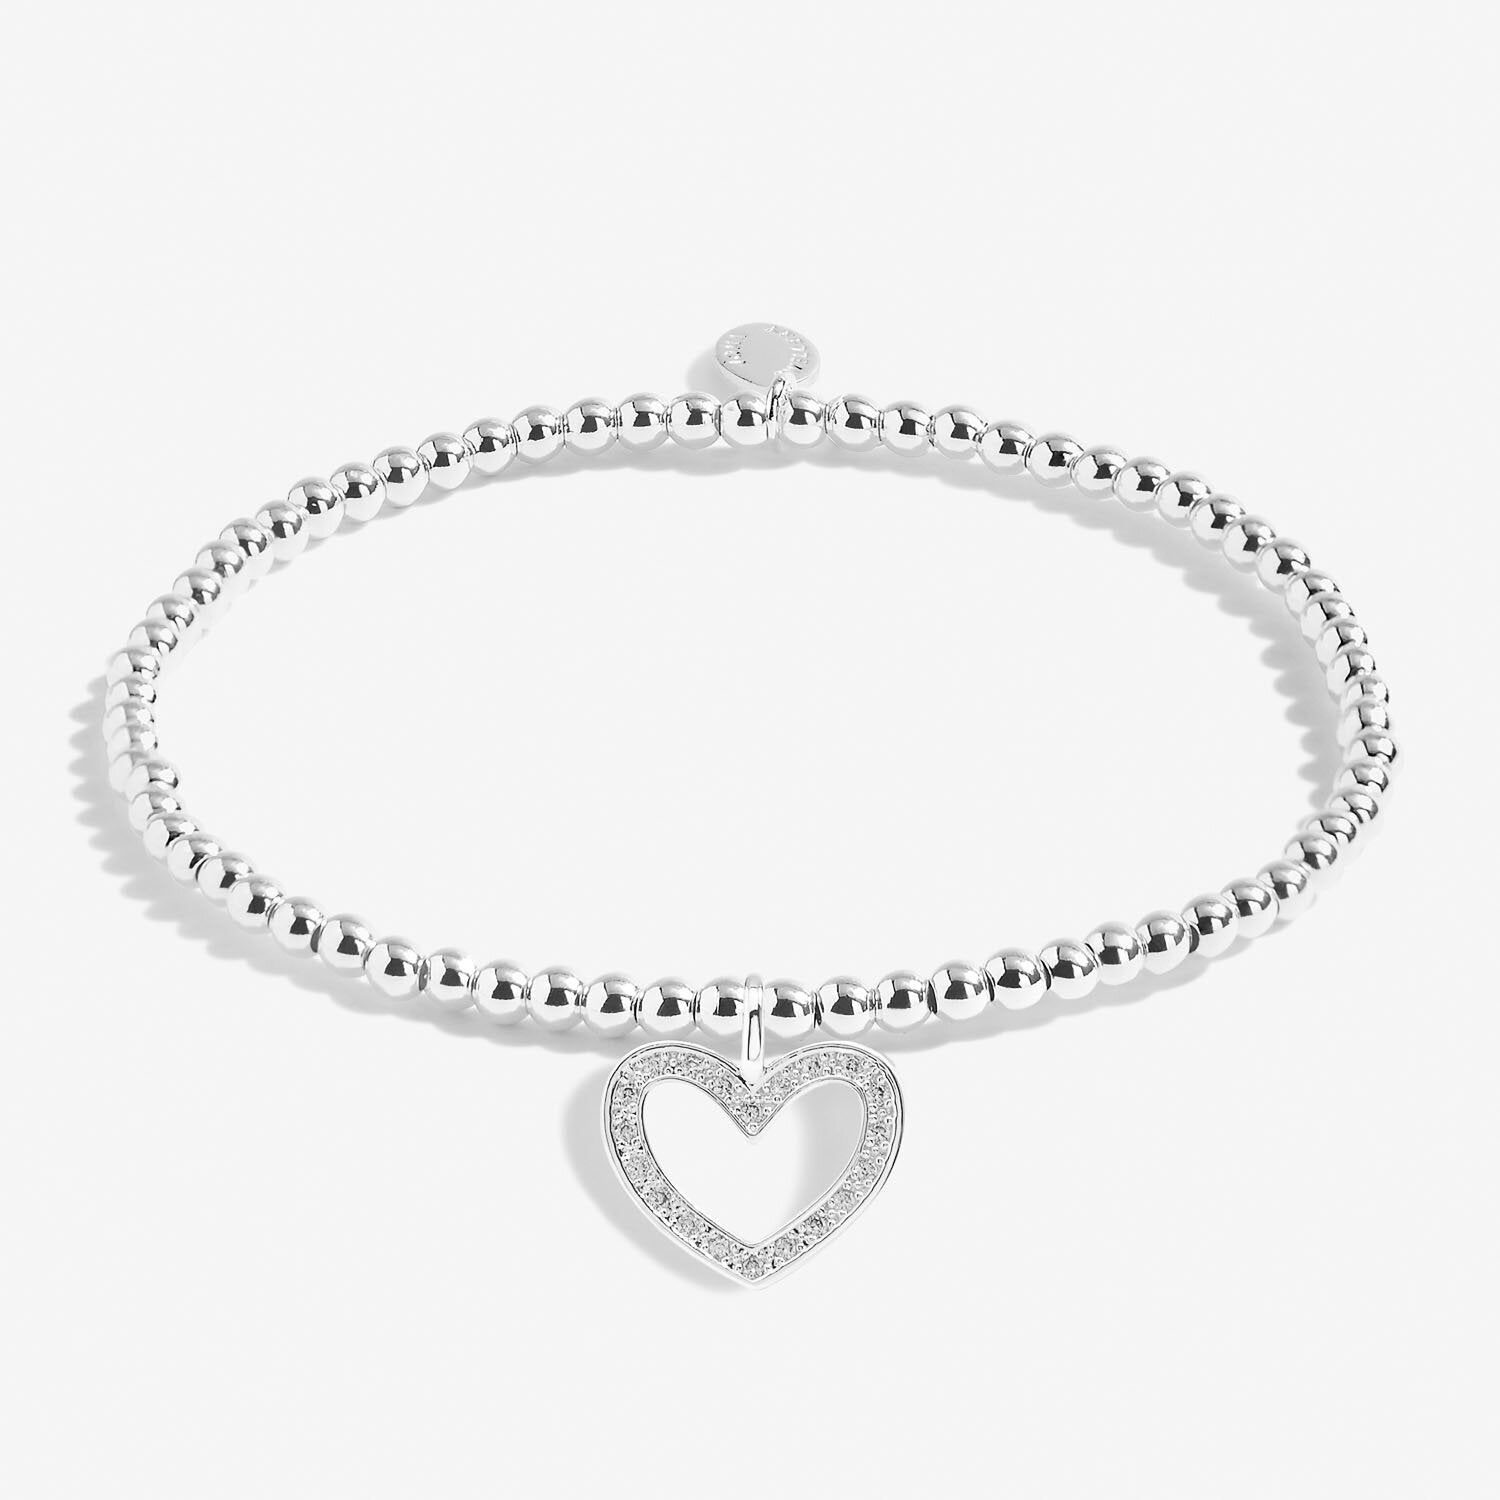 Bridal From The Heart Gift Box 'Maid Of Honour' Bracelet